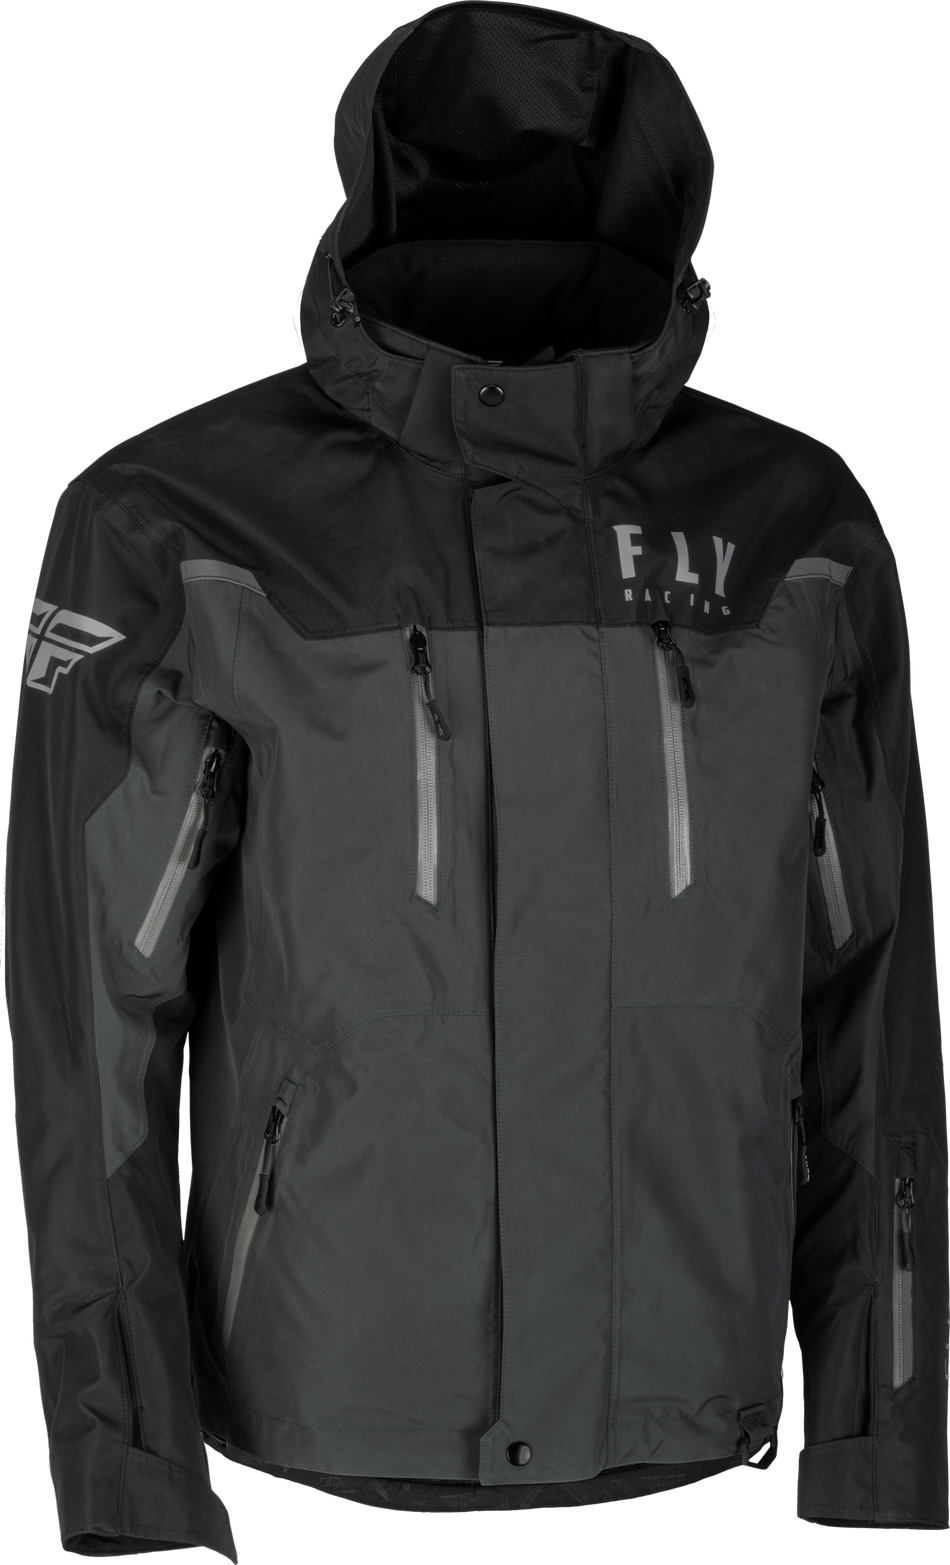 FLY RACING Incline Jacket Black/Charcoal Sm 470-4103S